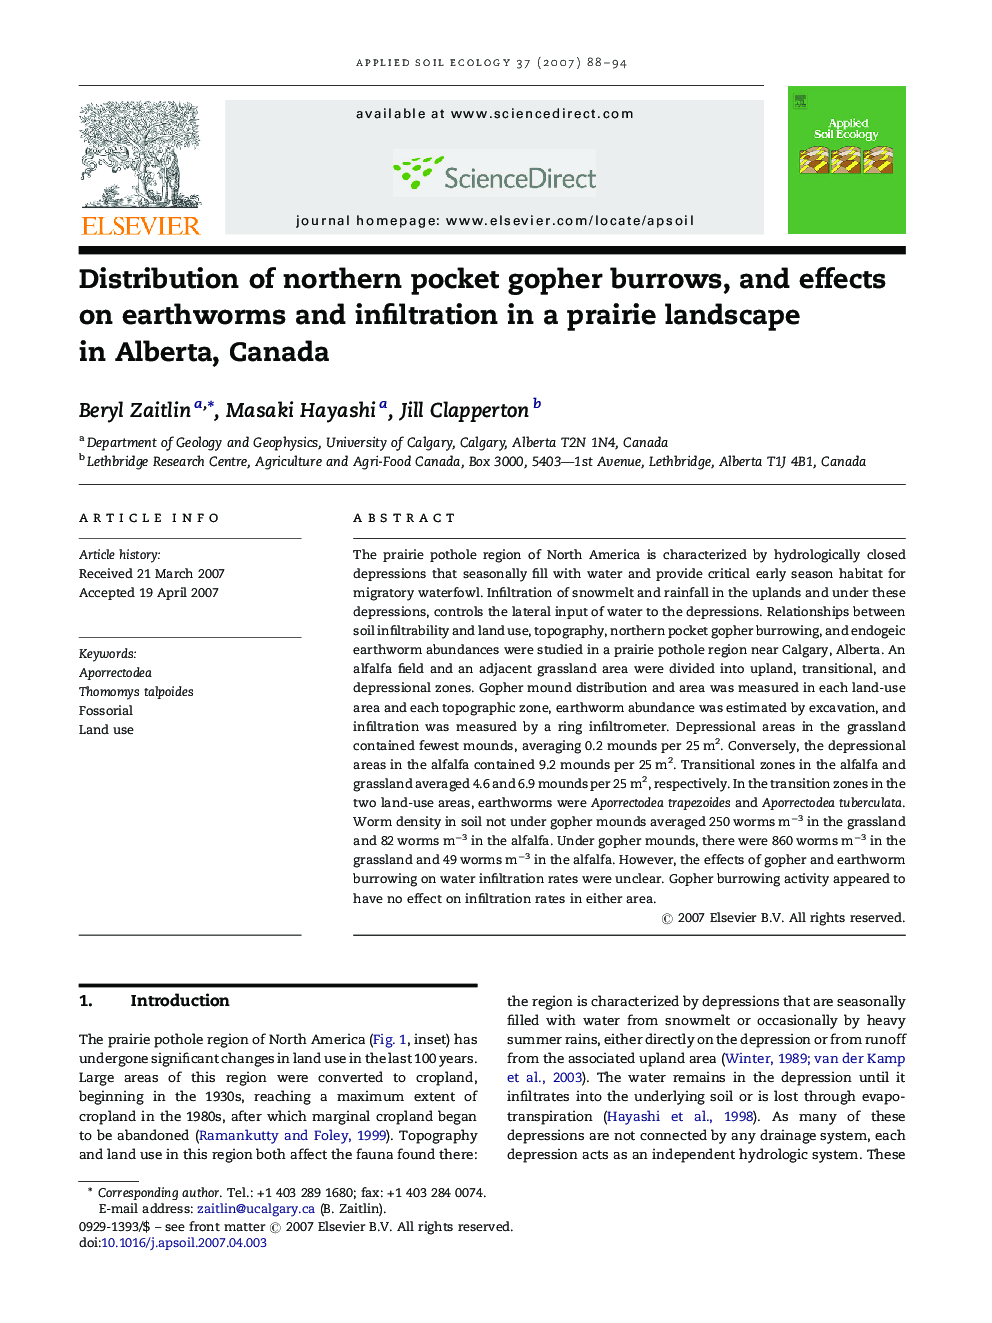 Distribution of northern pocket gopher burrows, and effects on earthworms and infiltration in a prairie landscape in Alberta, Canada